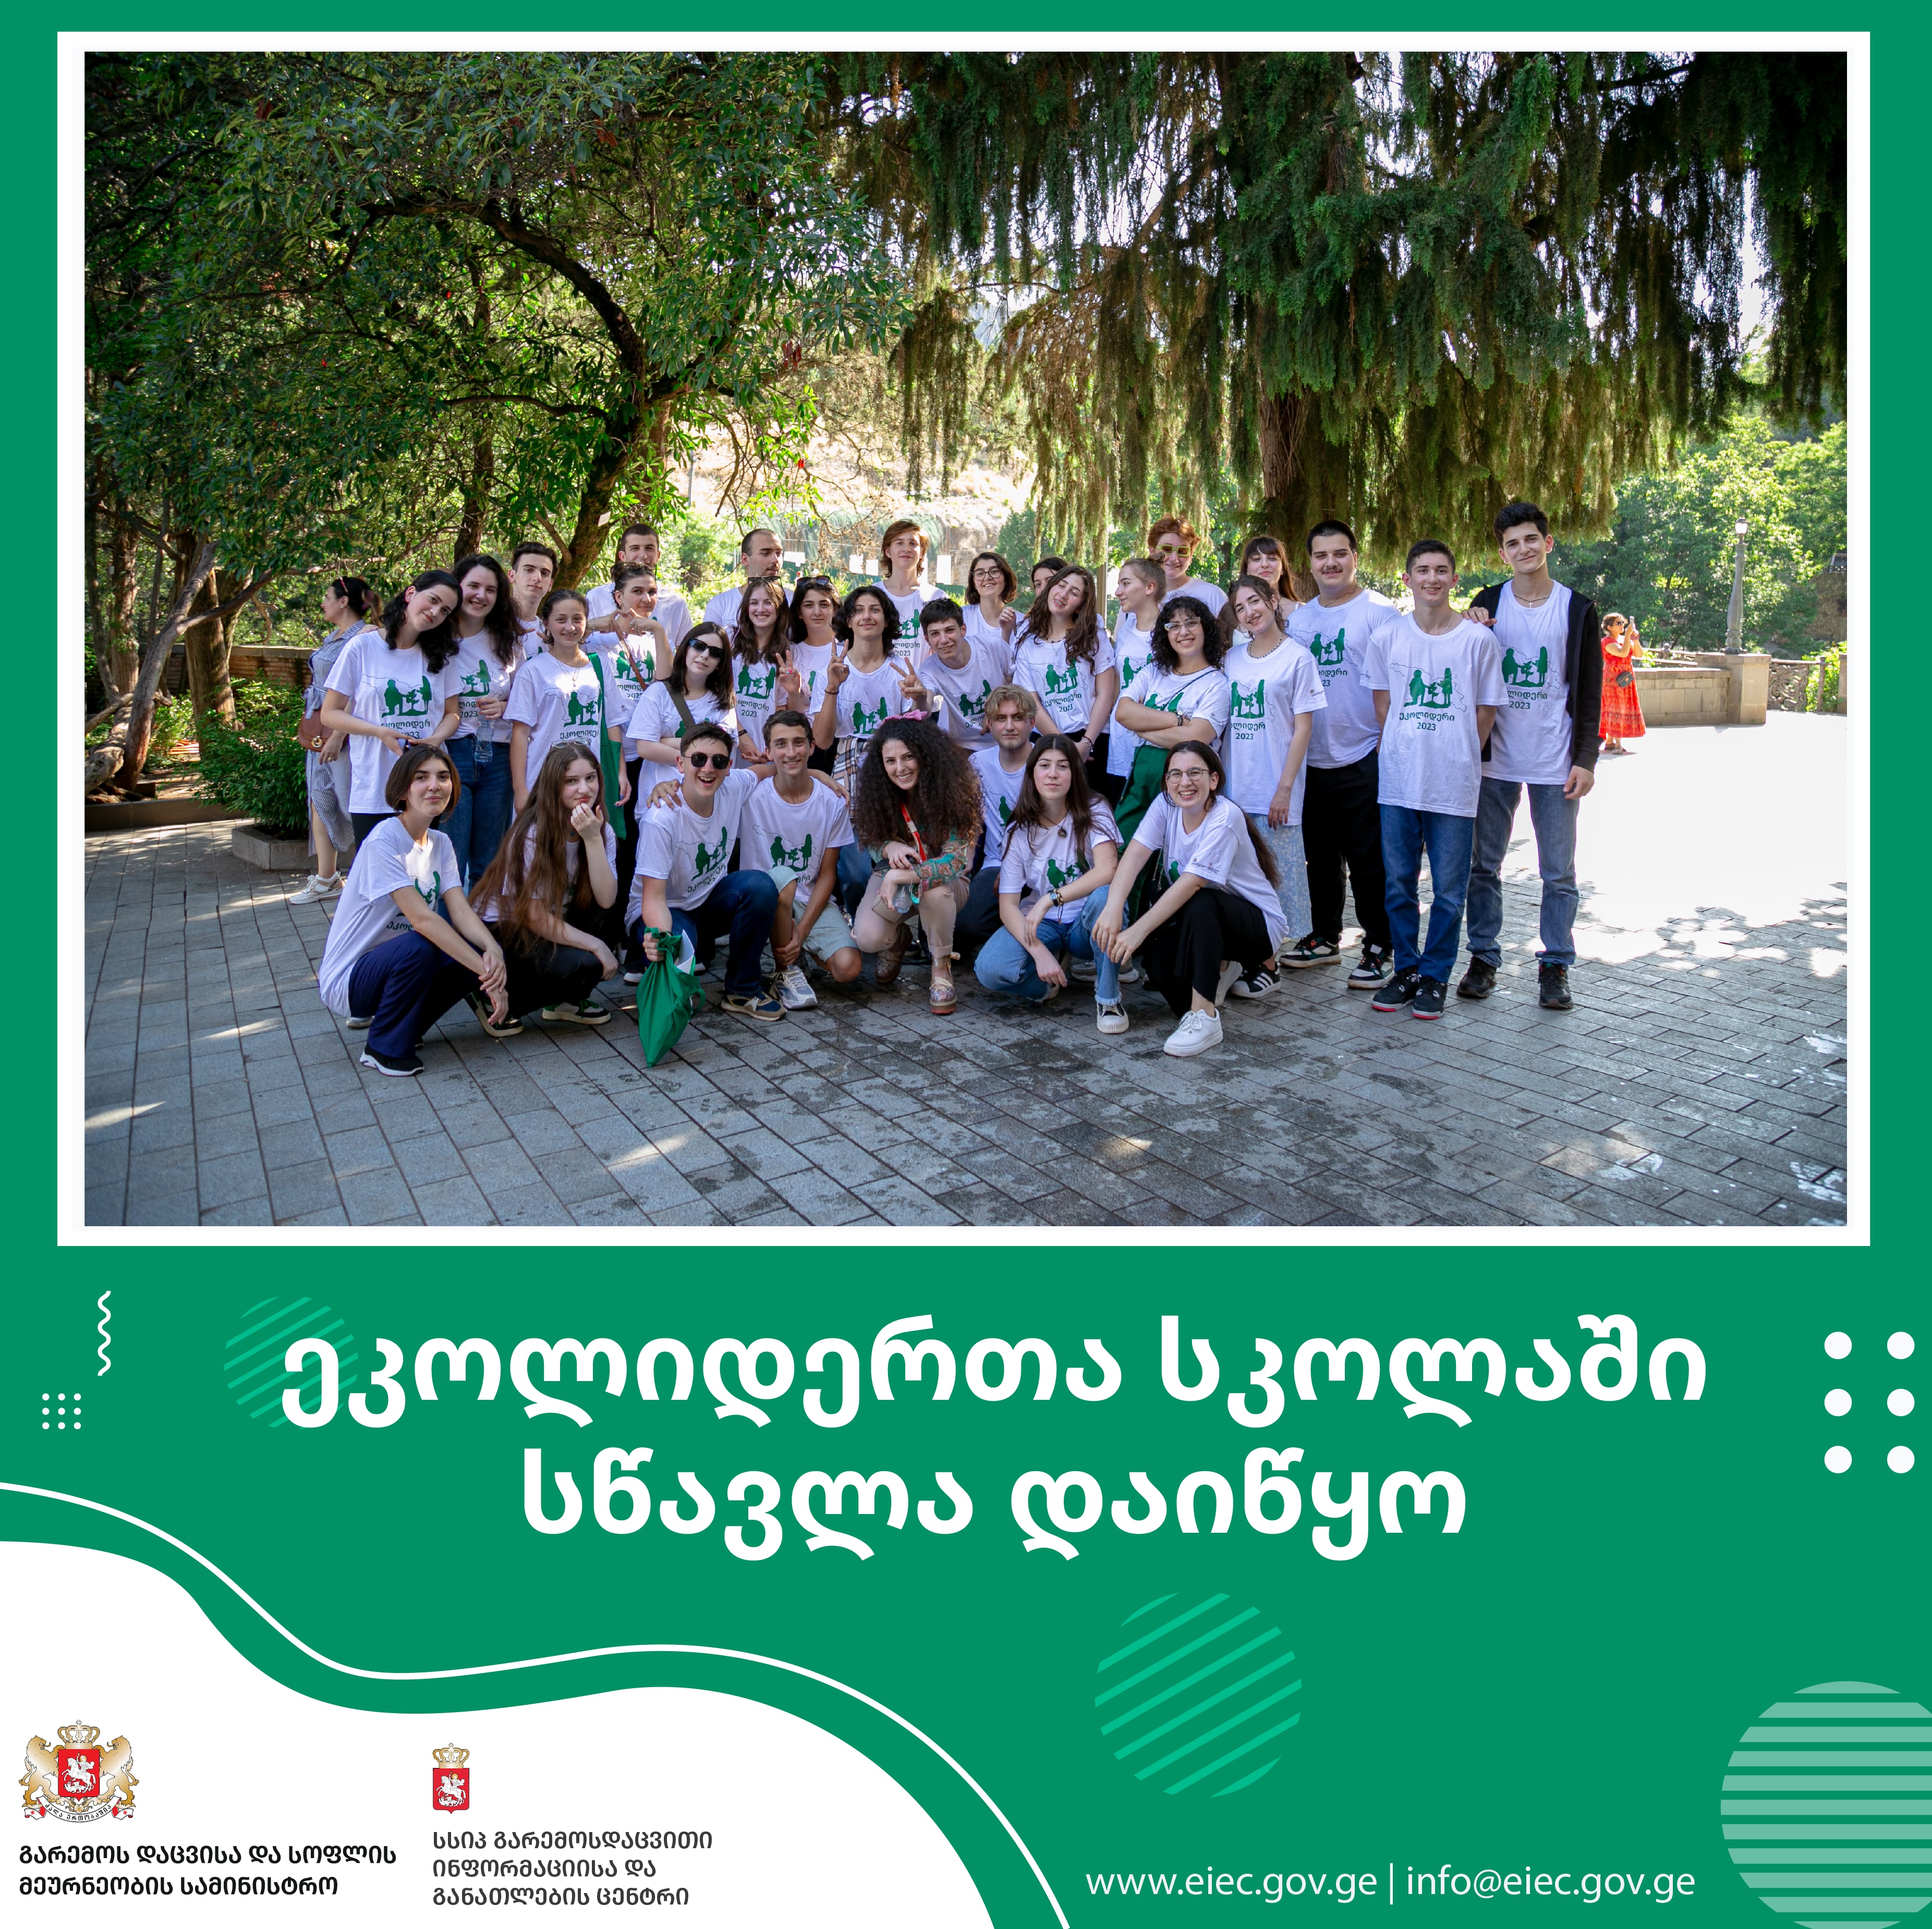 The learning course for ‘’Ecolider School’’ has started